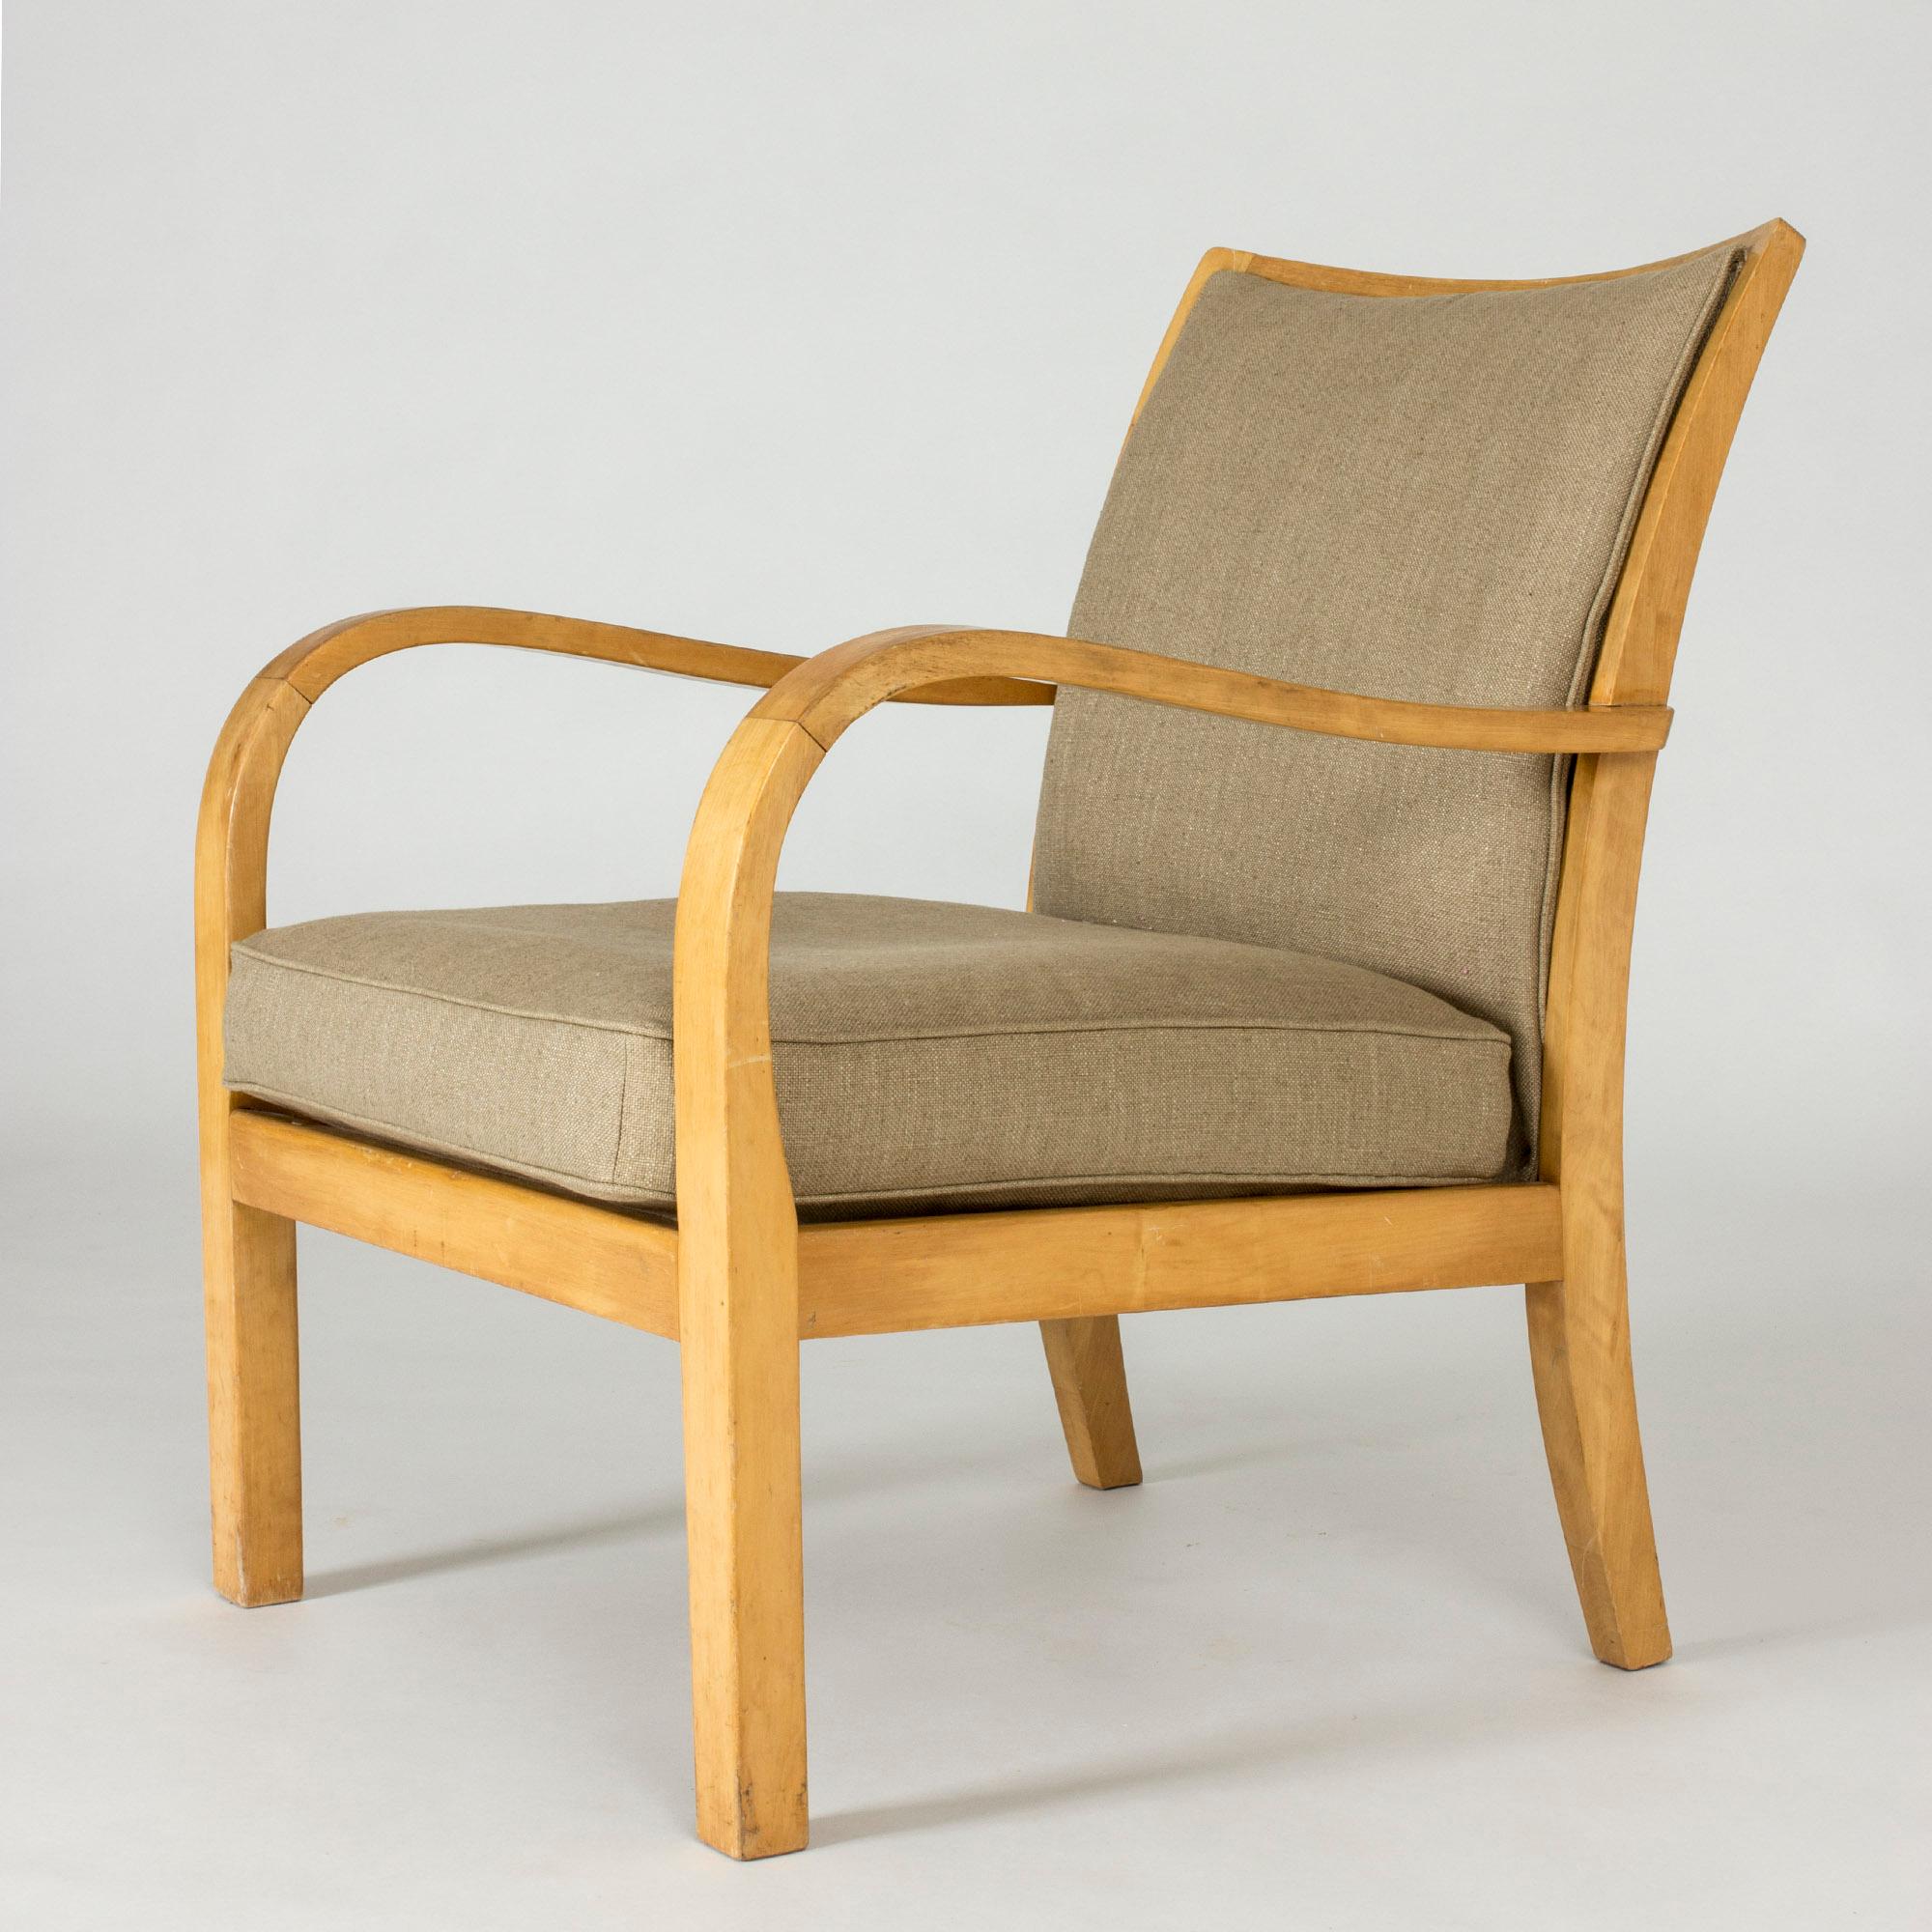 Pair of Functionalist Birch and Linen Lounge Chairs by Axel Larsson for Bodafors For Sale 2